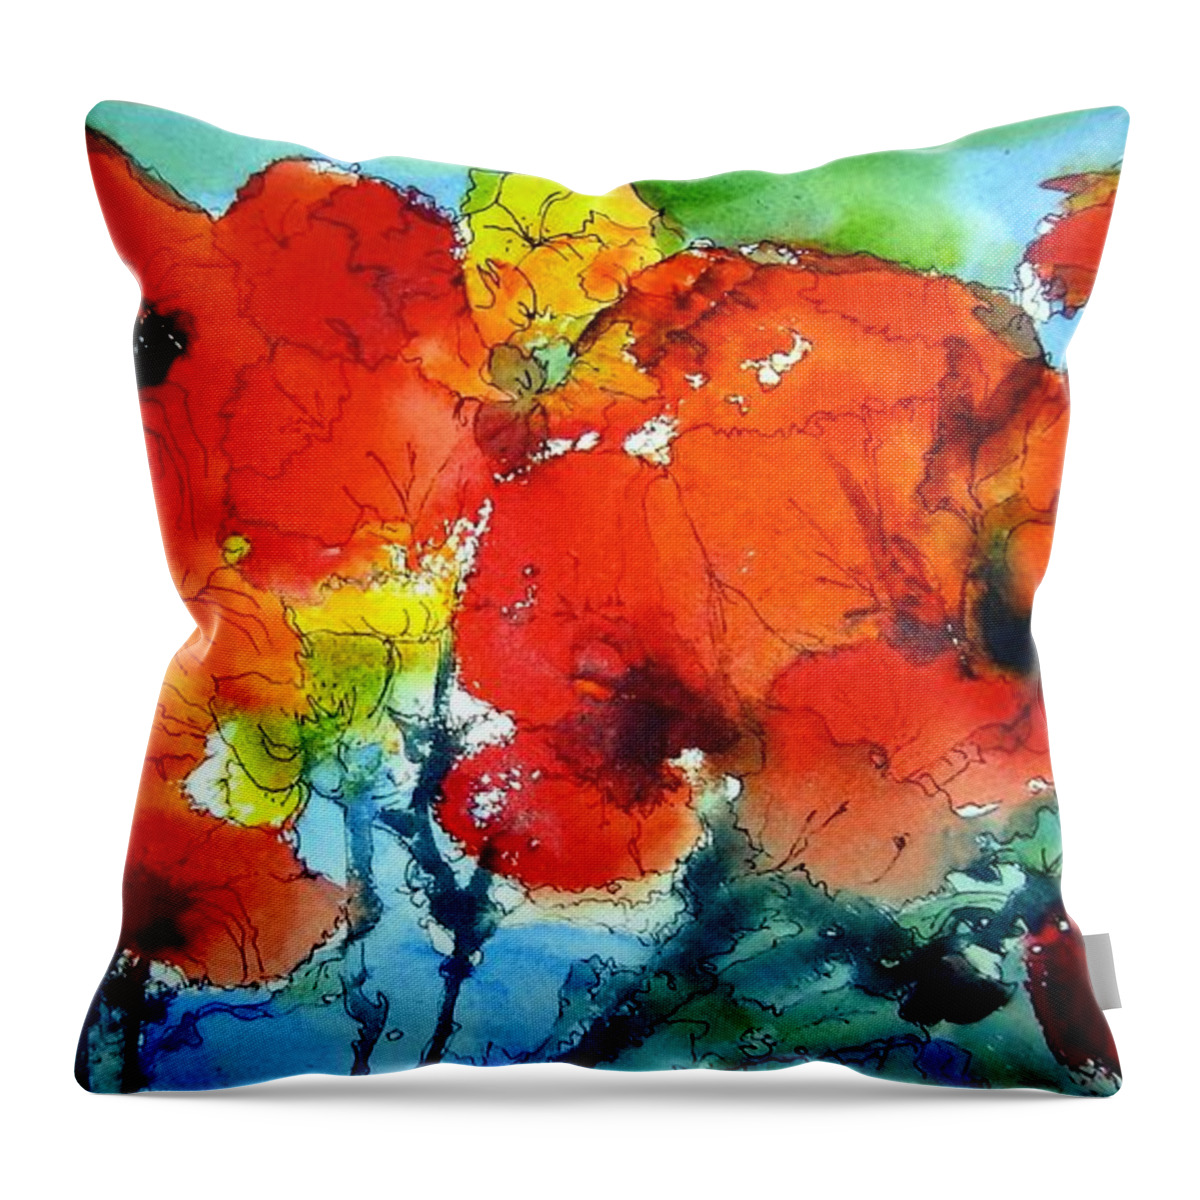 Poppies Throw Pillow featuring the painting Poppy Bouquet by Anne Duke